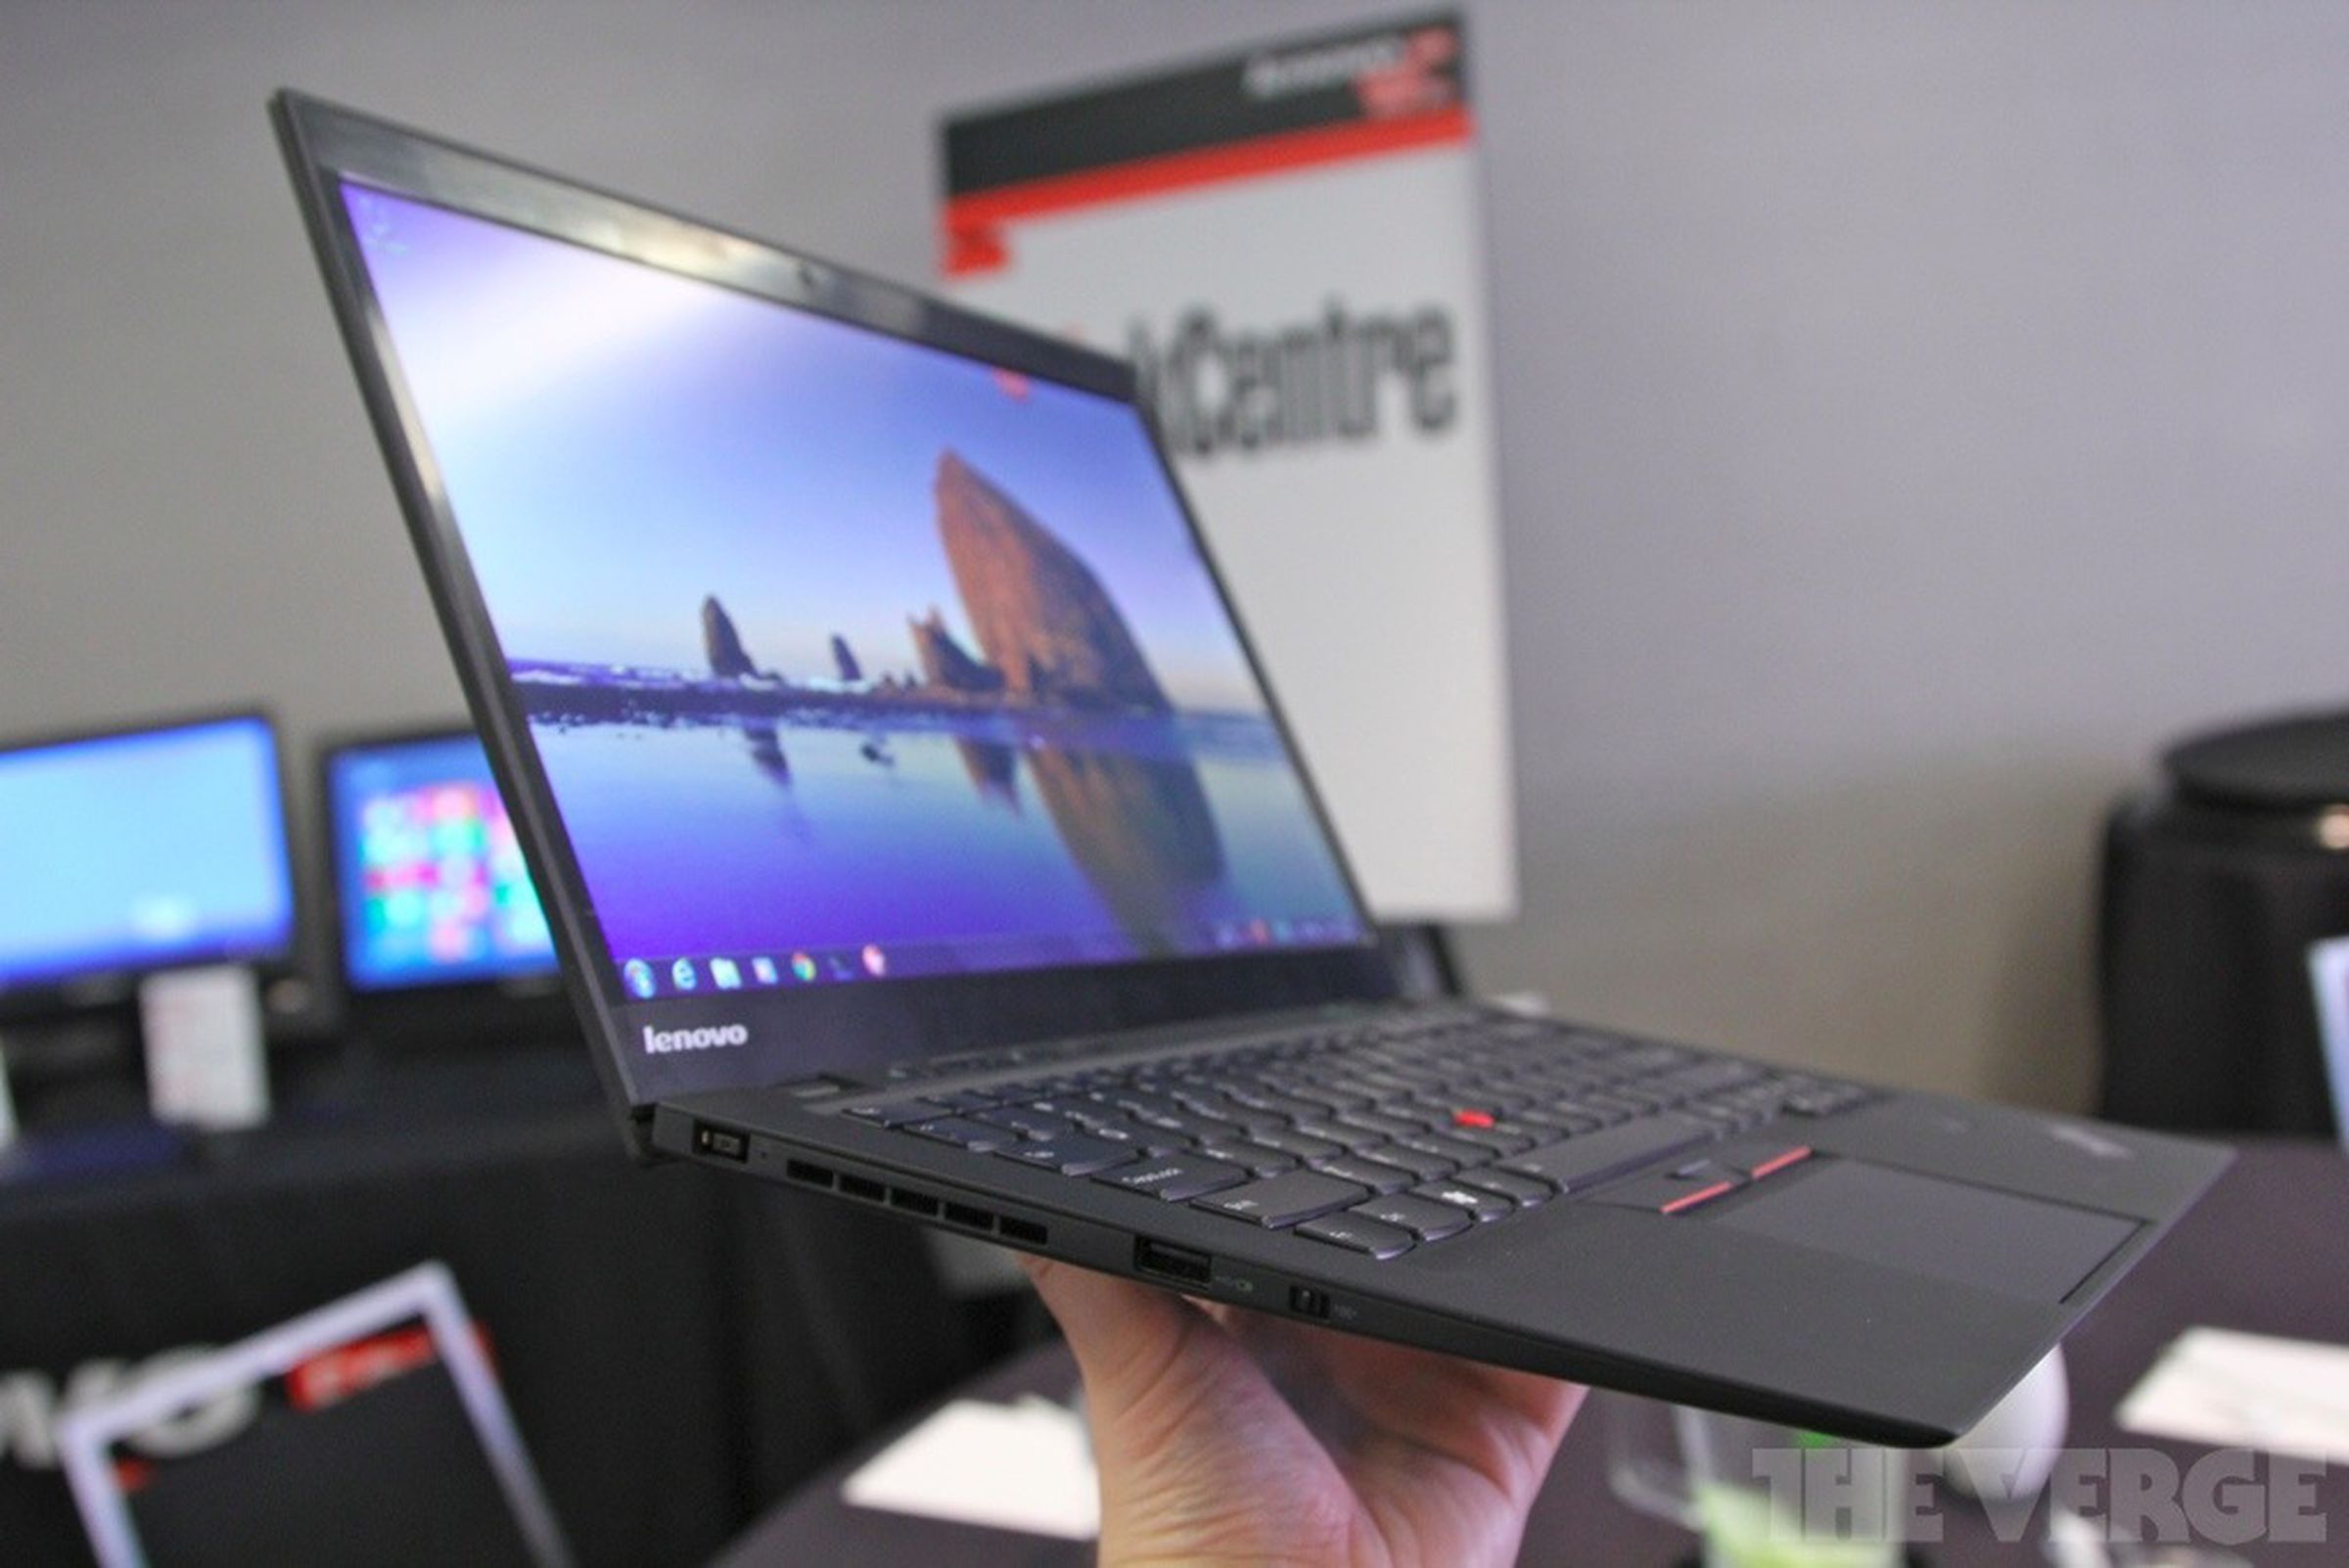 Lenovo ThinkPad X1 Carbon hands-on pictures